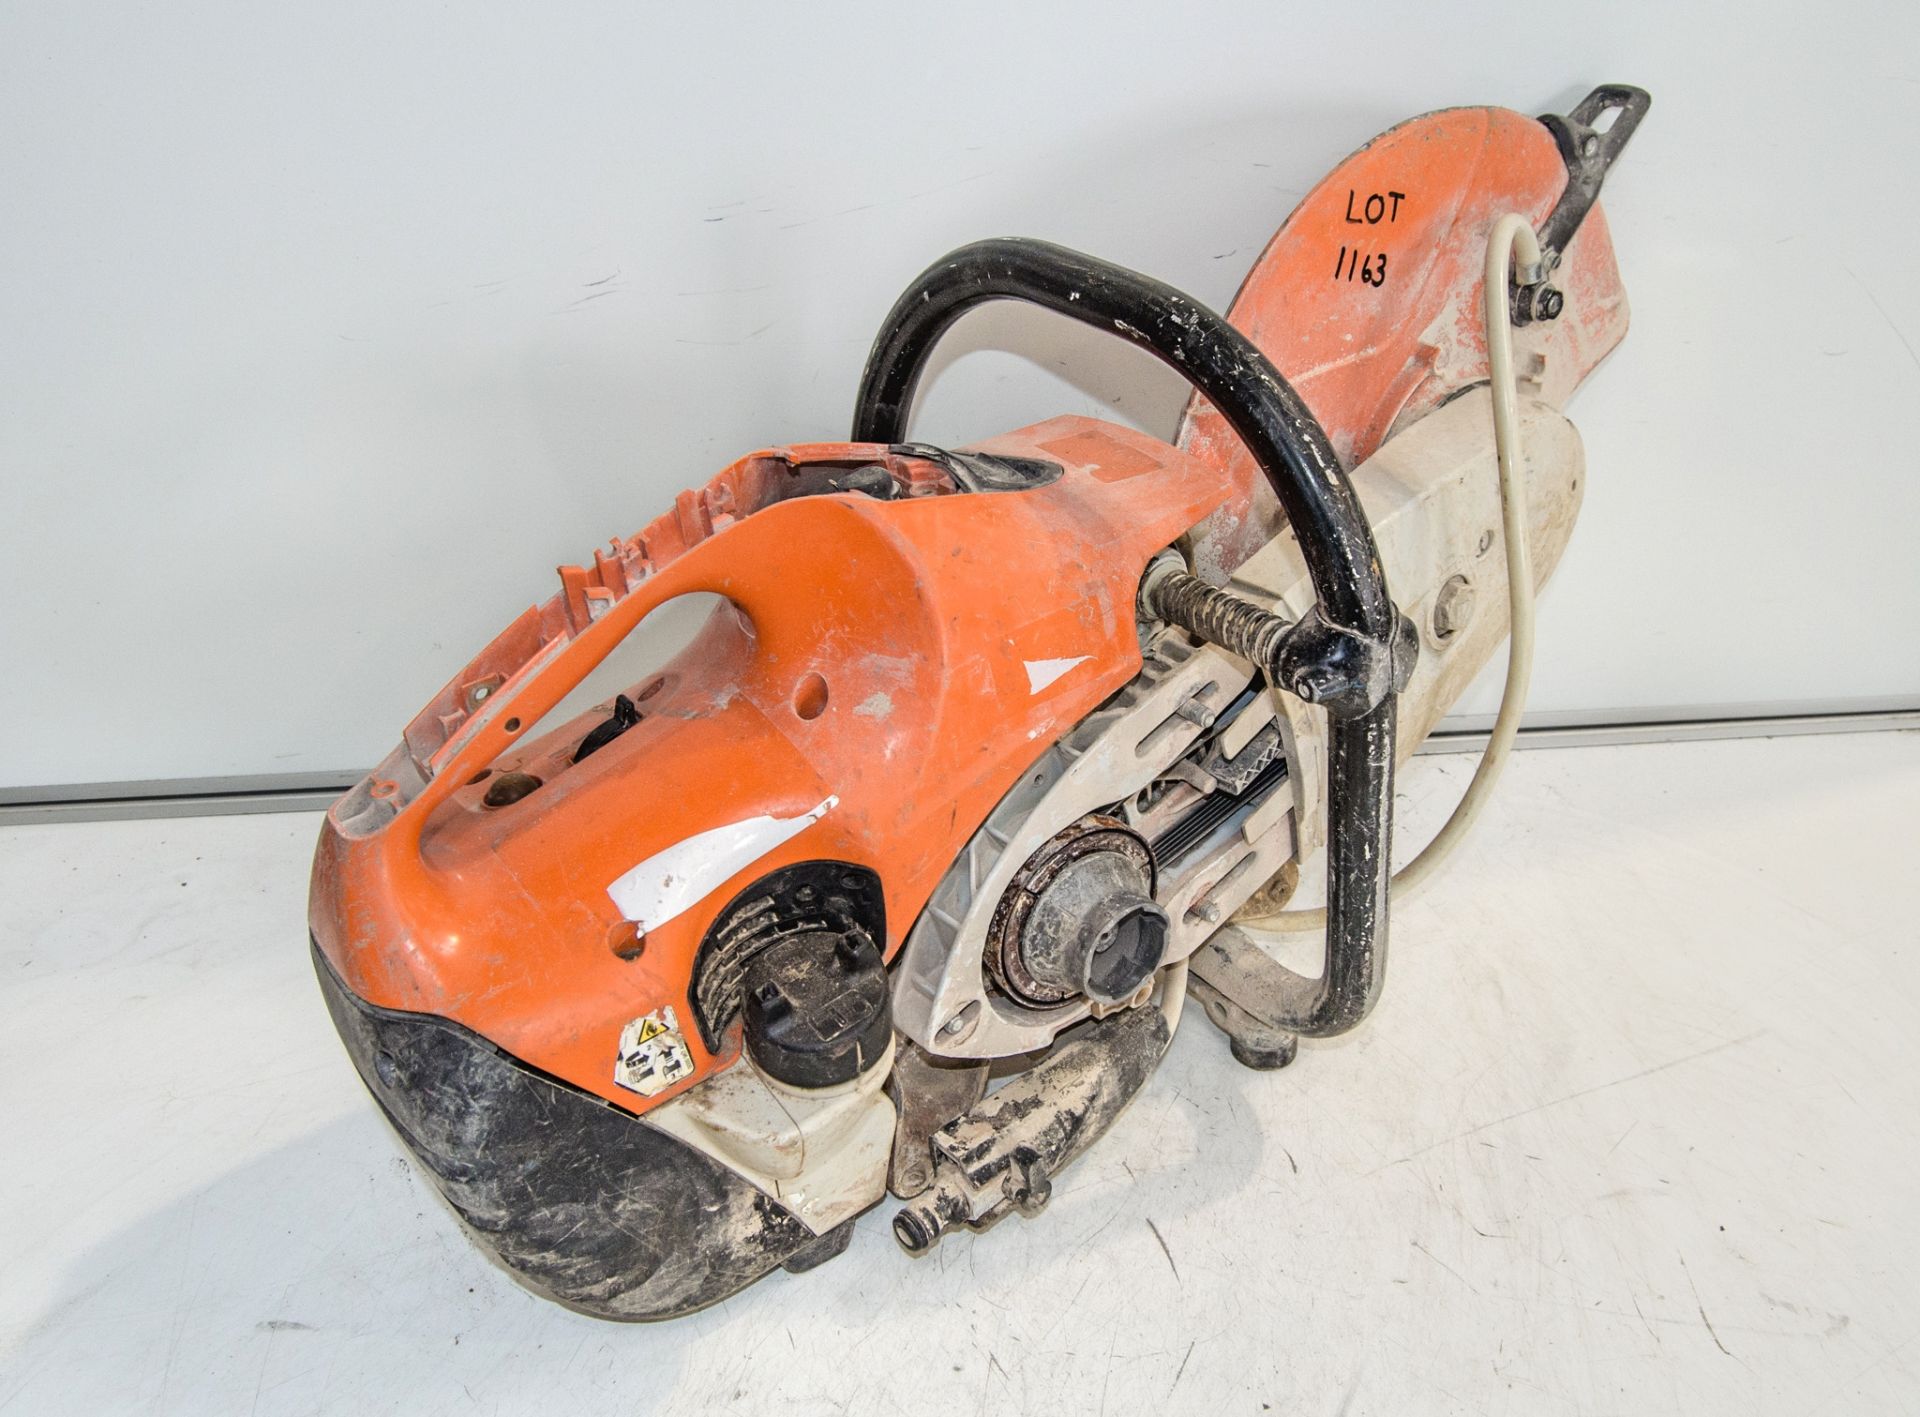 Stihl TS410 petrol driven cut off saw ** Pull cord assembly and handle parts missing ** 19025947 - Bild 2 aus 2